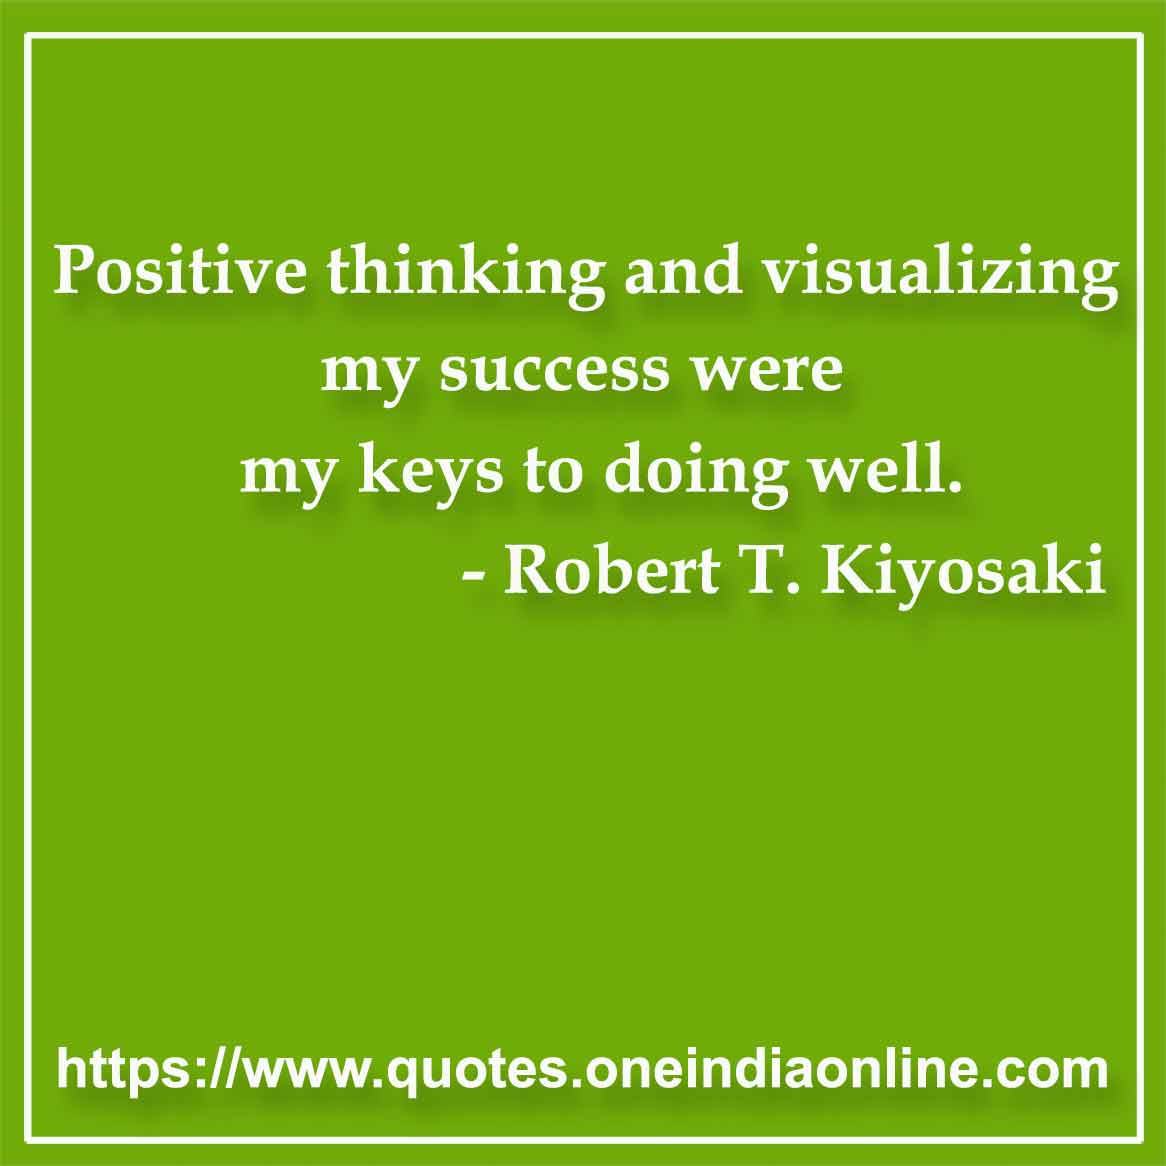 Positive thinking and visualizing my success were my keys to doing well. 

-  by Robert T. Kiyosaki